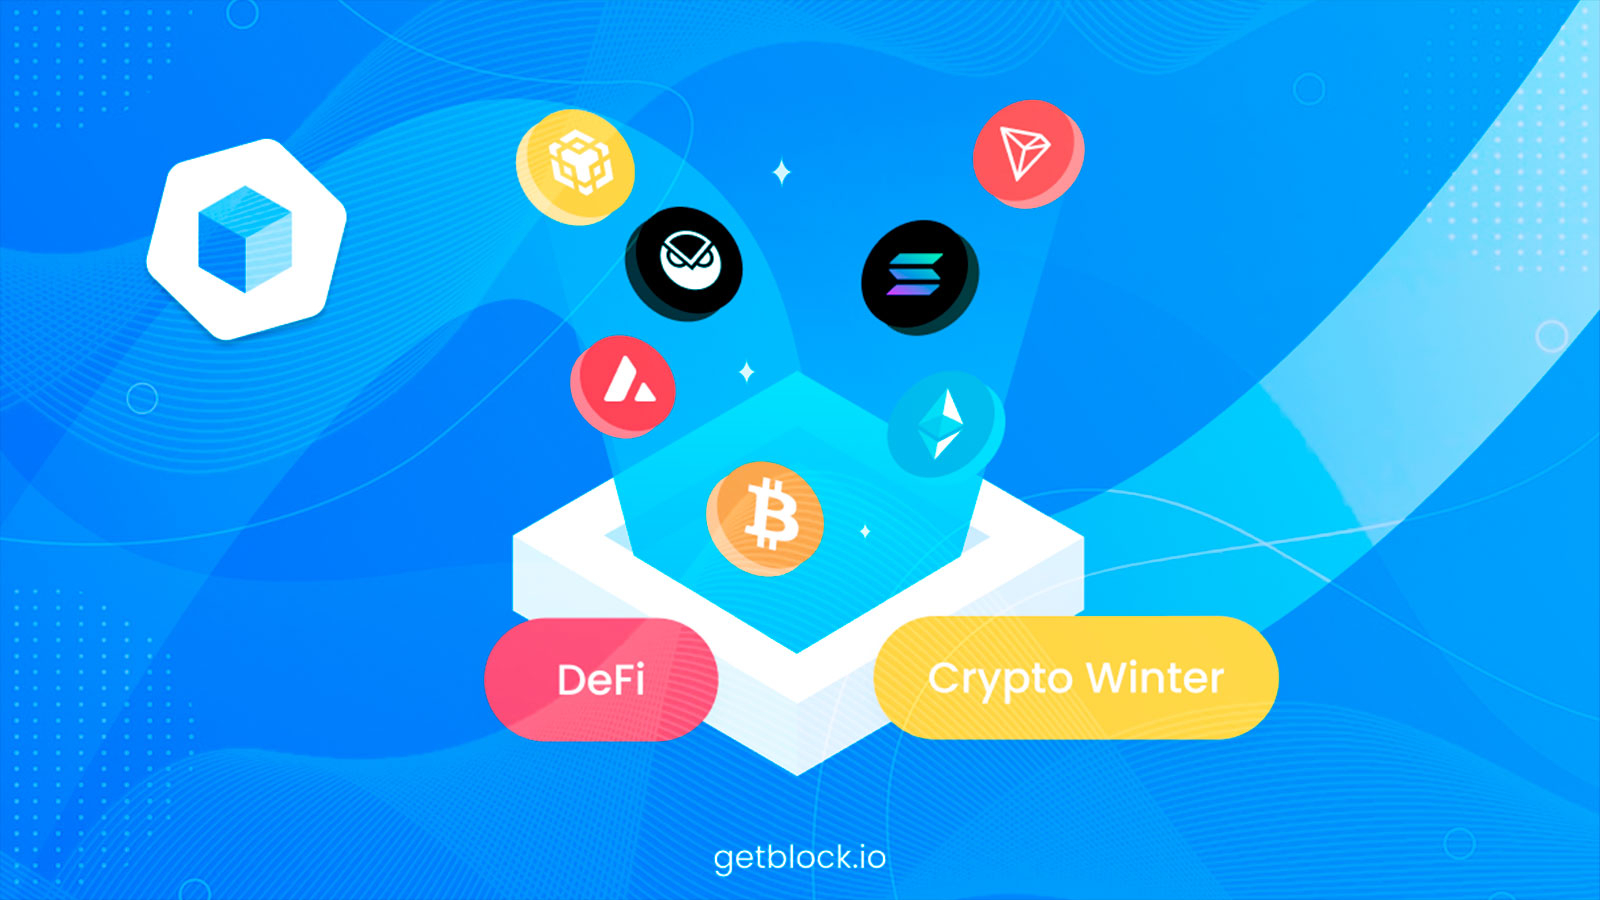 GetBlock Supercharges DeFis with High-End Blockchain APIs: Here’s How